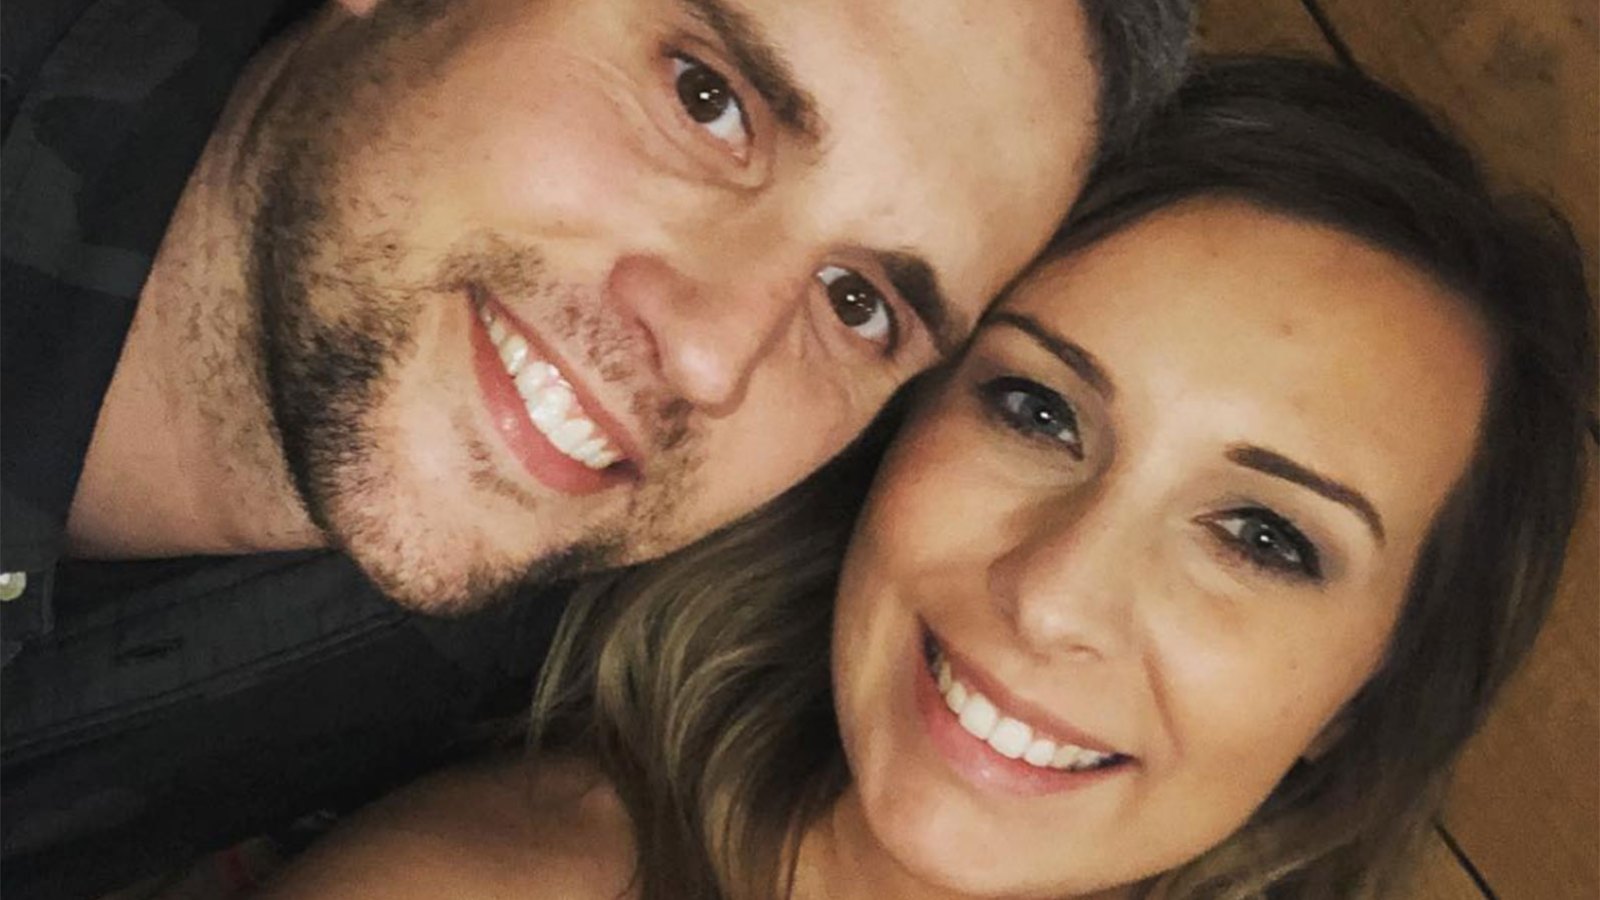 Mackenzie Edwards Shares Sweet Selfie With Husband Ryan Edwards for New Year's, Calls Him 'Best Lover'